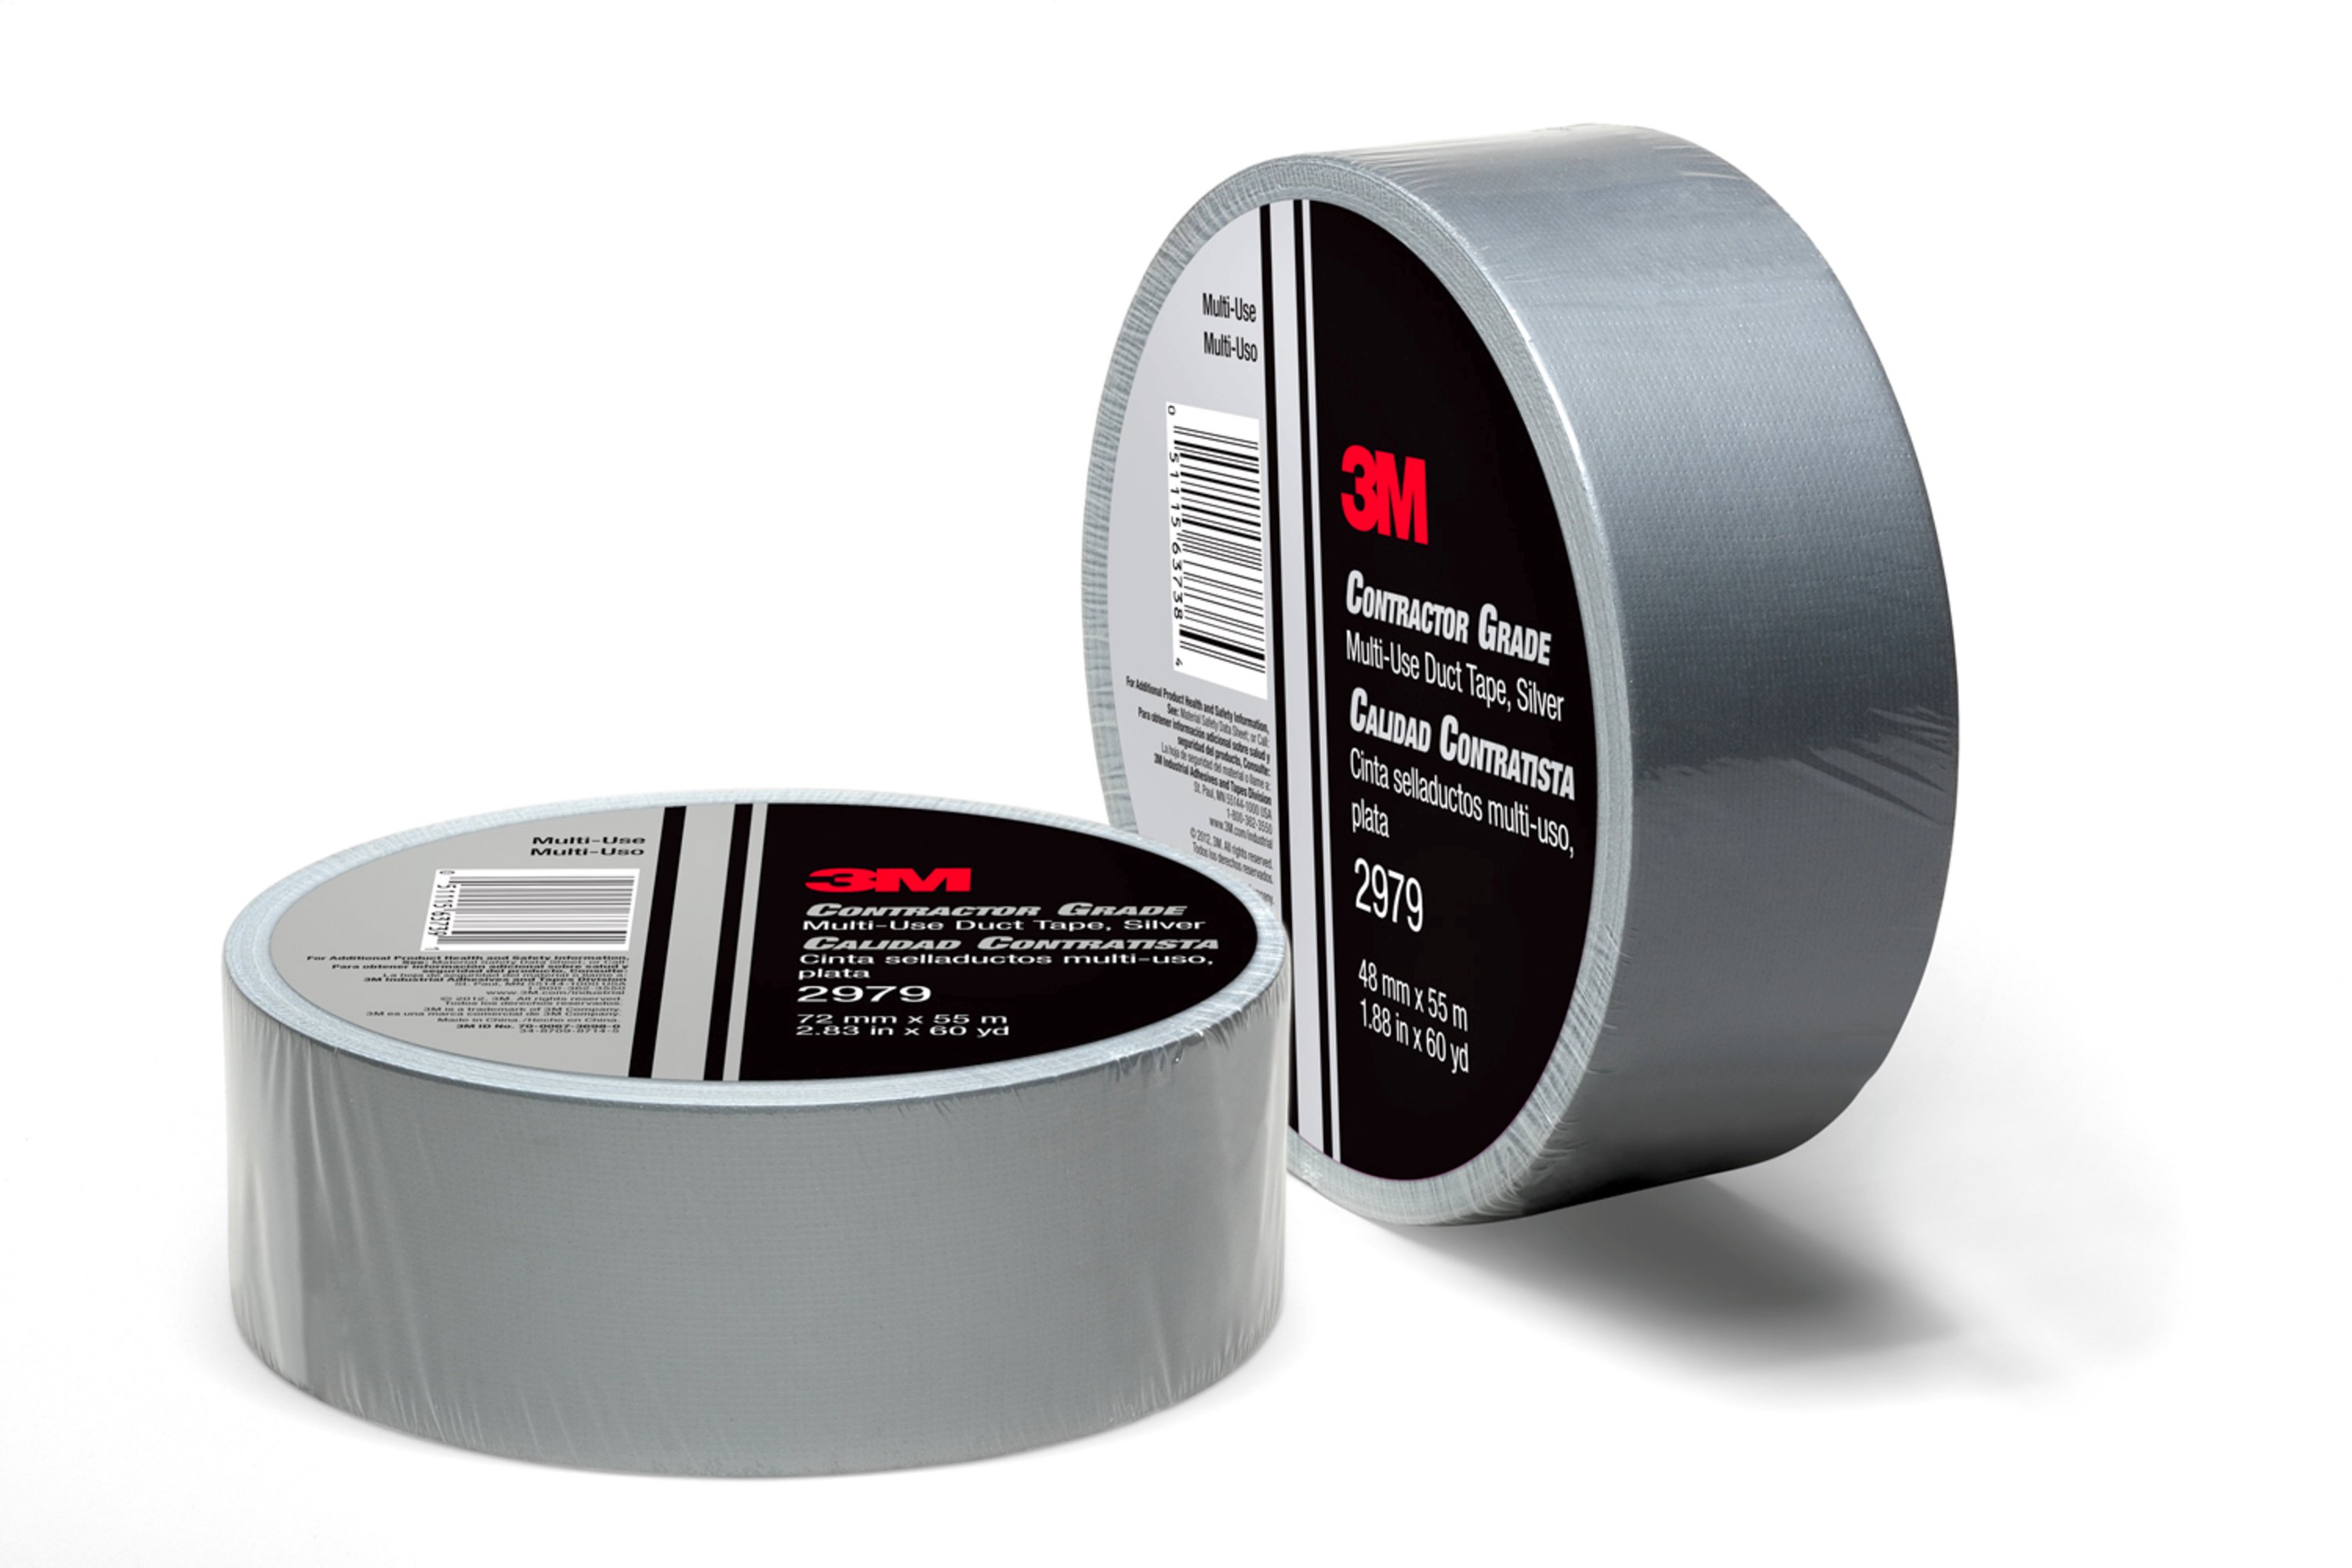 3M's family of rugged cloth and duct tapes adheres to most surfaces for applications ranging